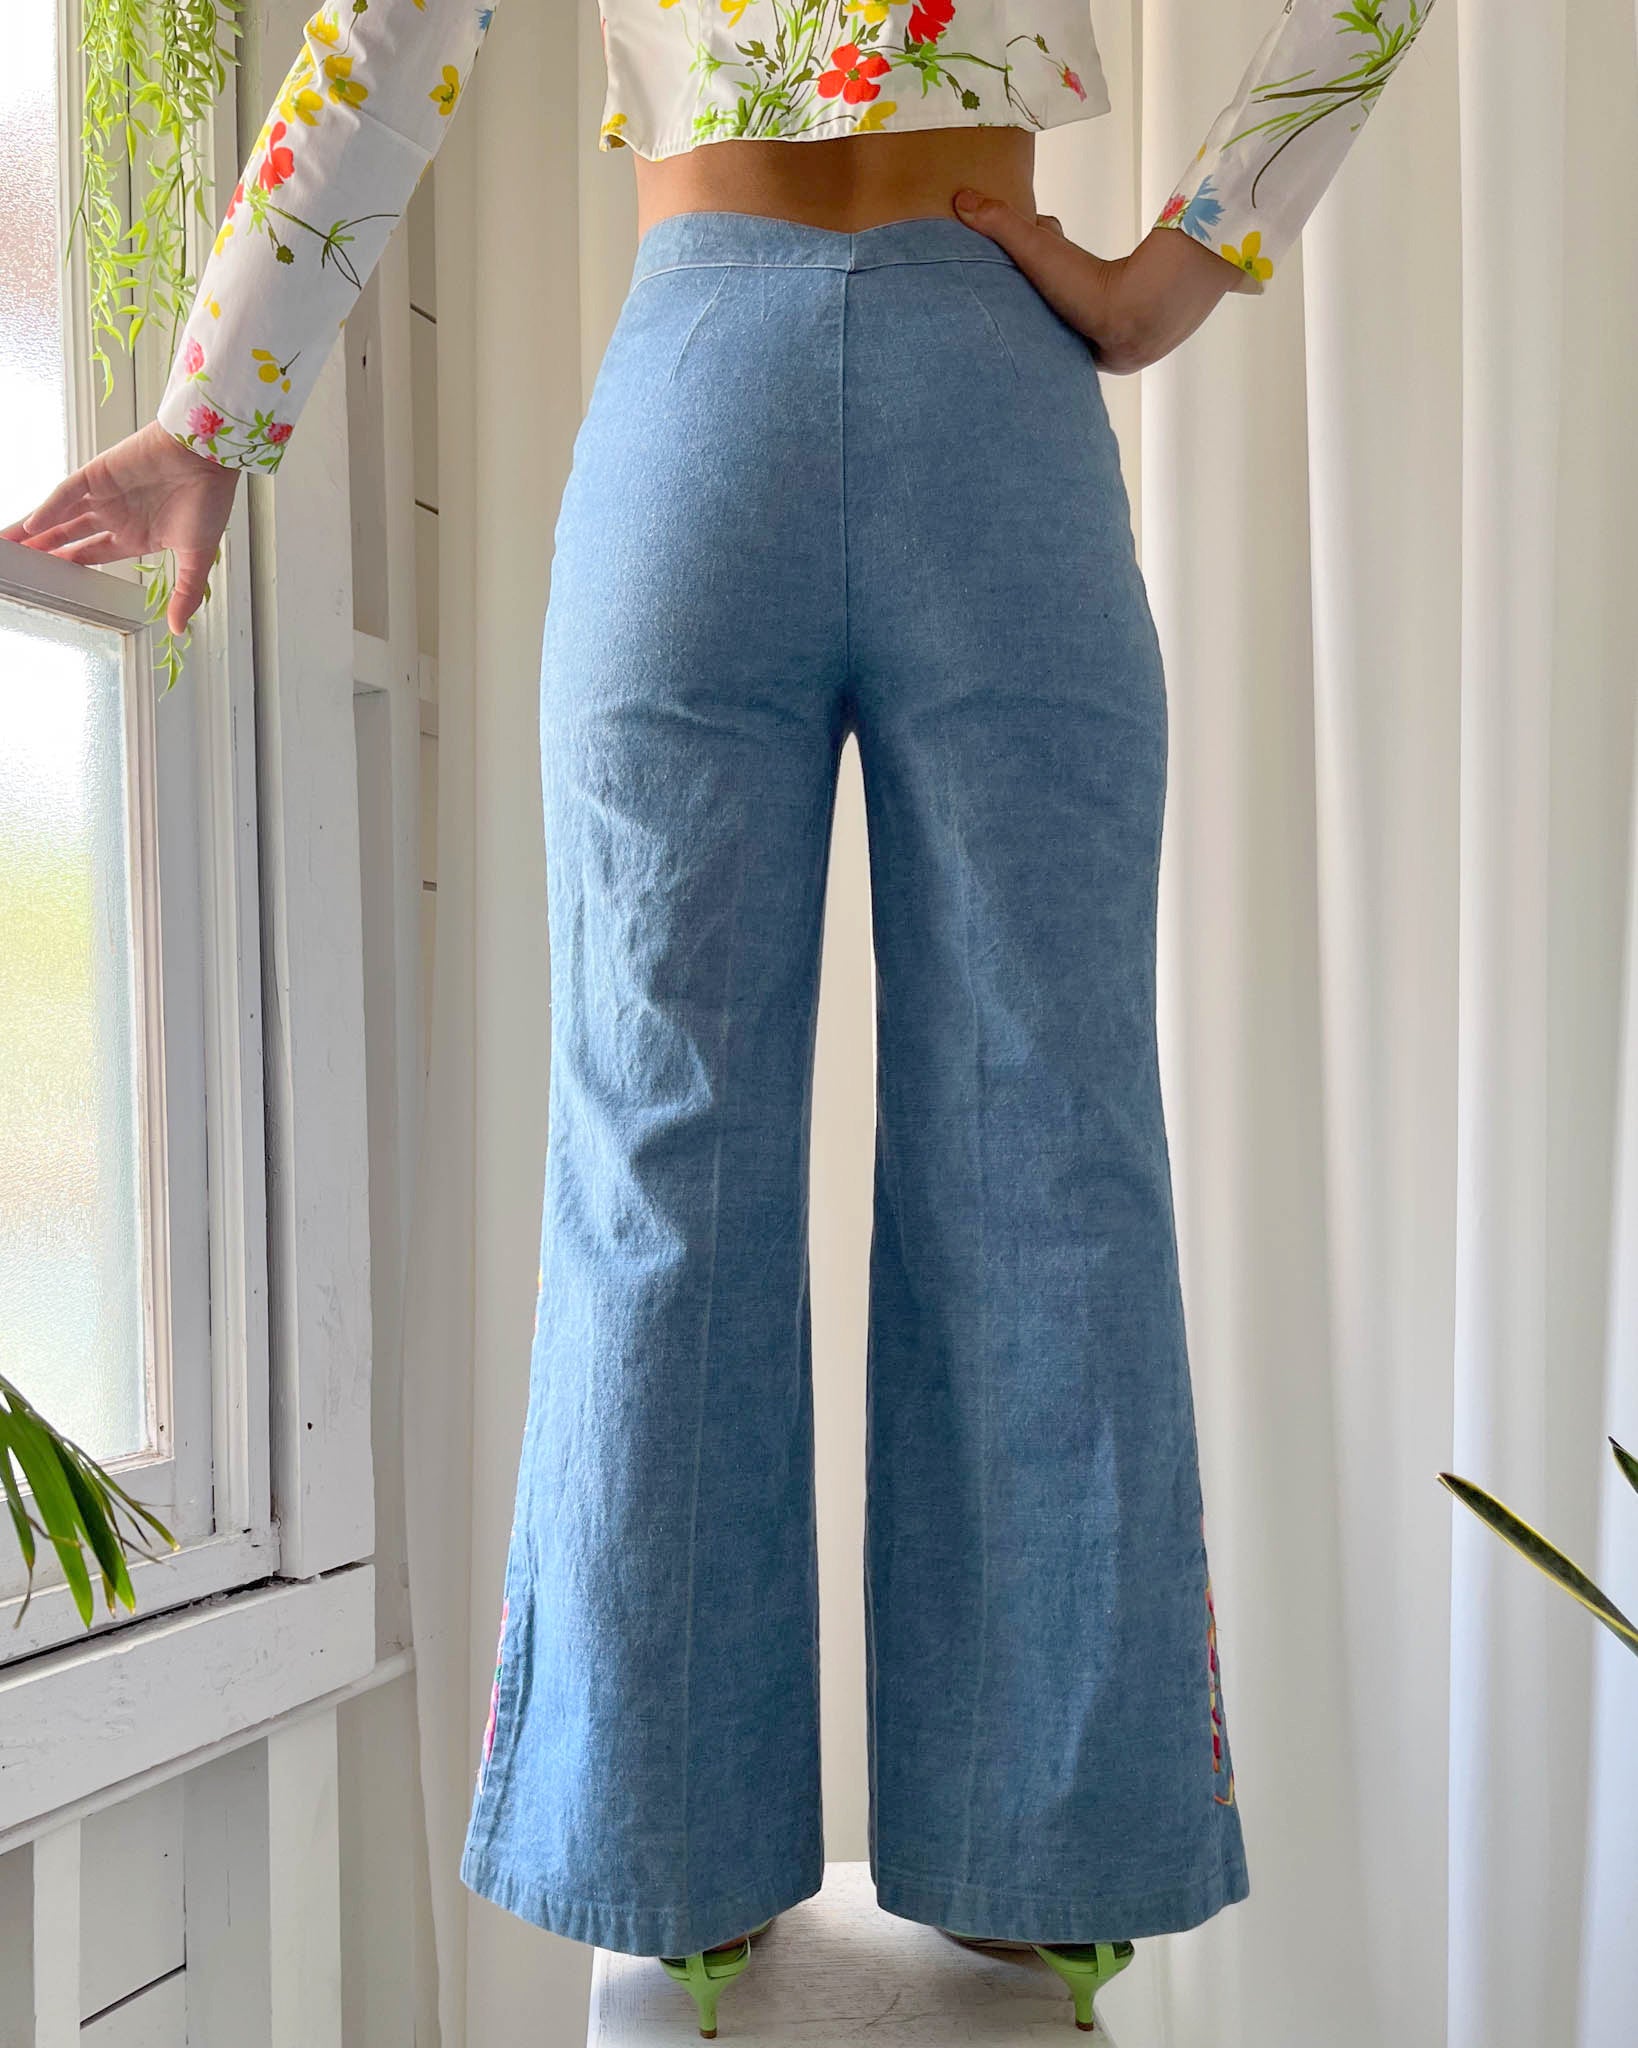 70s Embroidered Peacock Bellbottom Jeans - Lucky Vintage